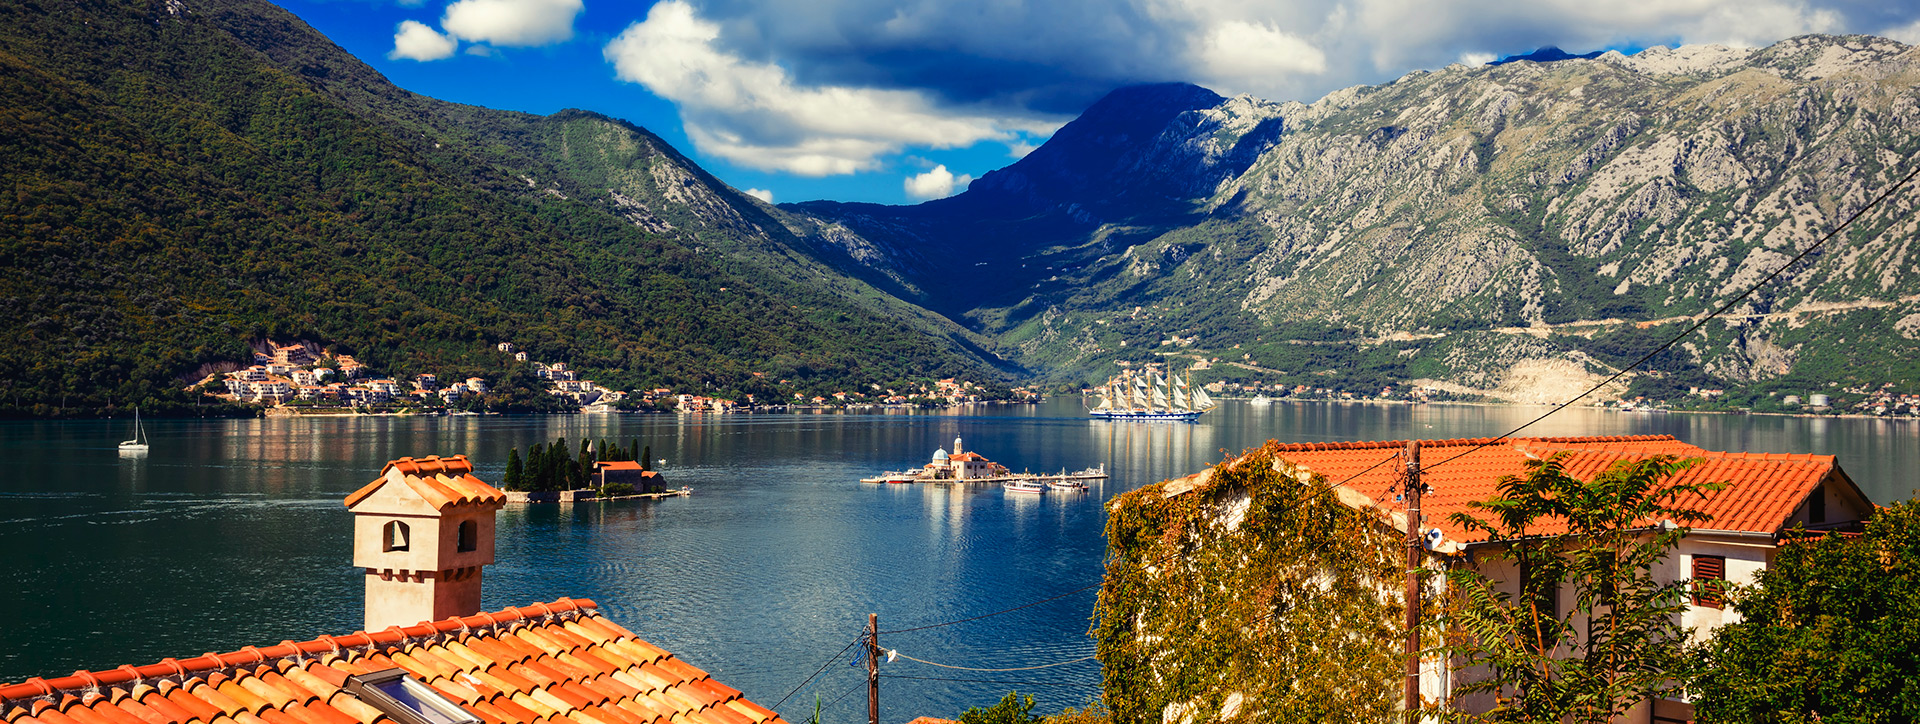 The Islands of St. George and Virgin on the Reef, opposite Perast, Montenegro - Adriatic sailing routes of SimpleSail